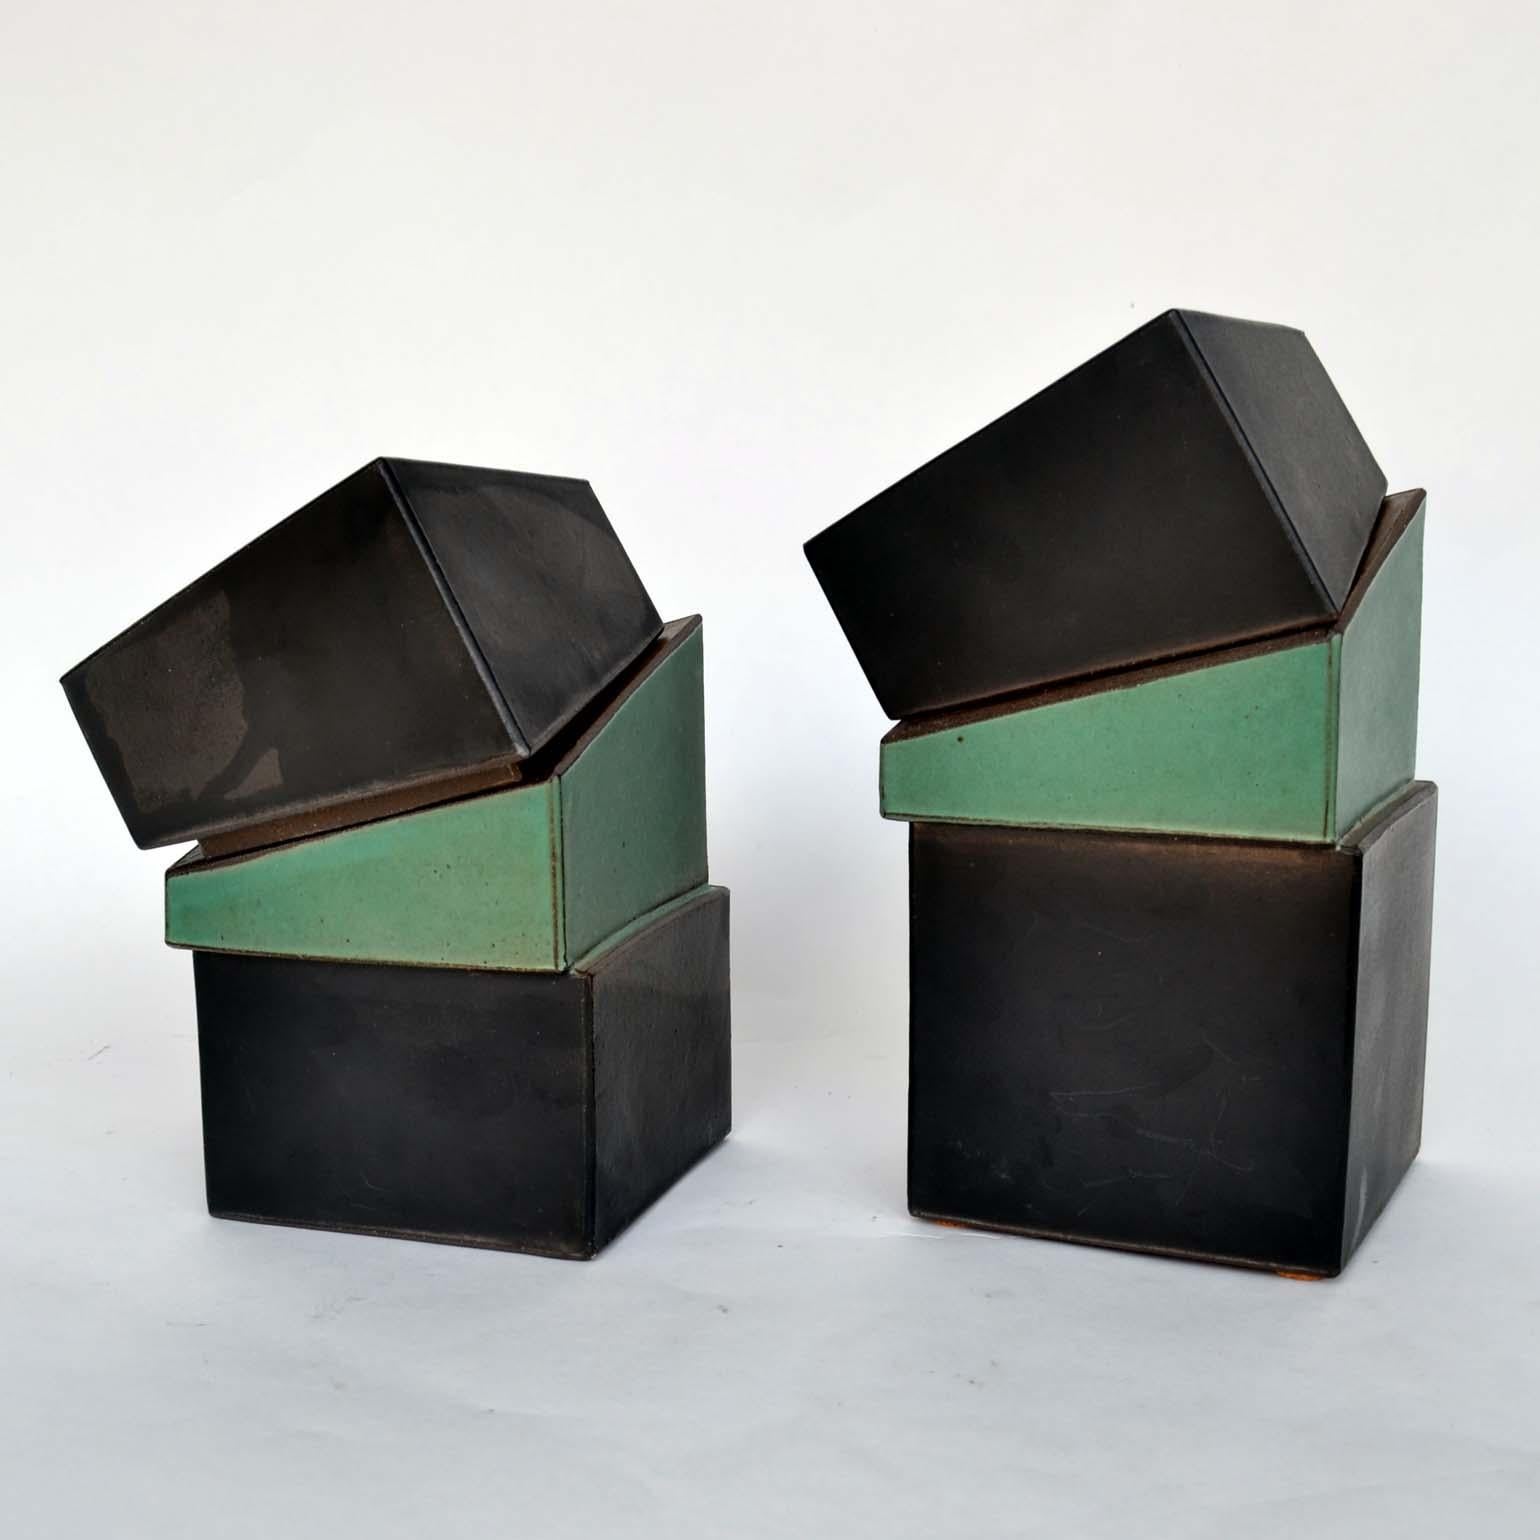 Late 20th Century Pair of Square Studio Pottery Boxes in Sage Green and Black  For Sale